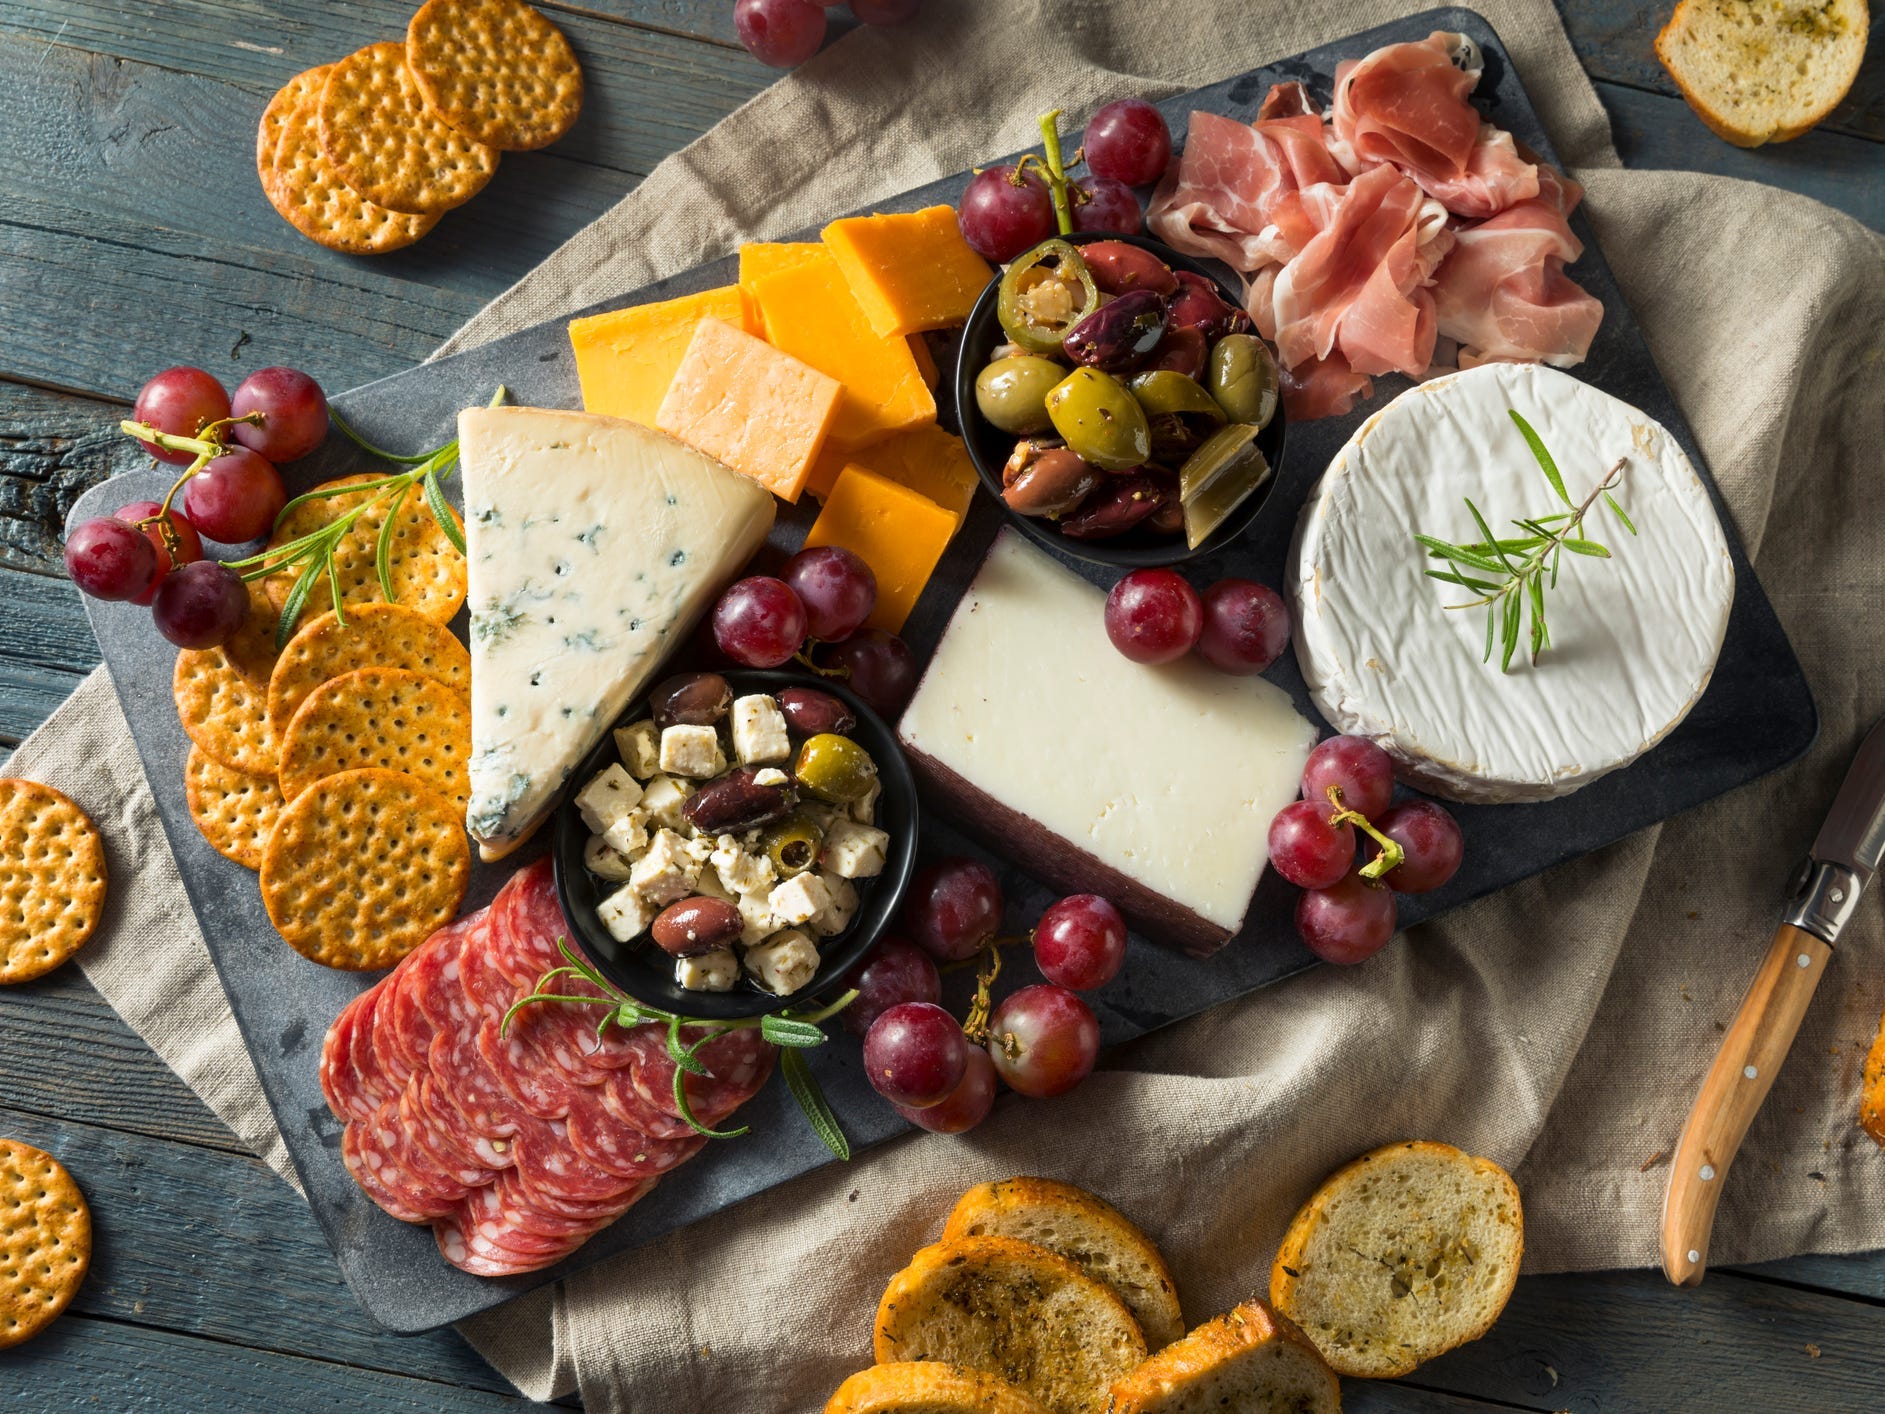 A charcuterie and cheese board with crackers, grapes, and olives